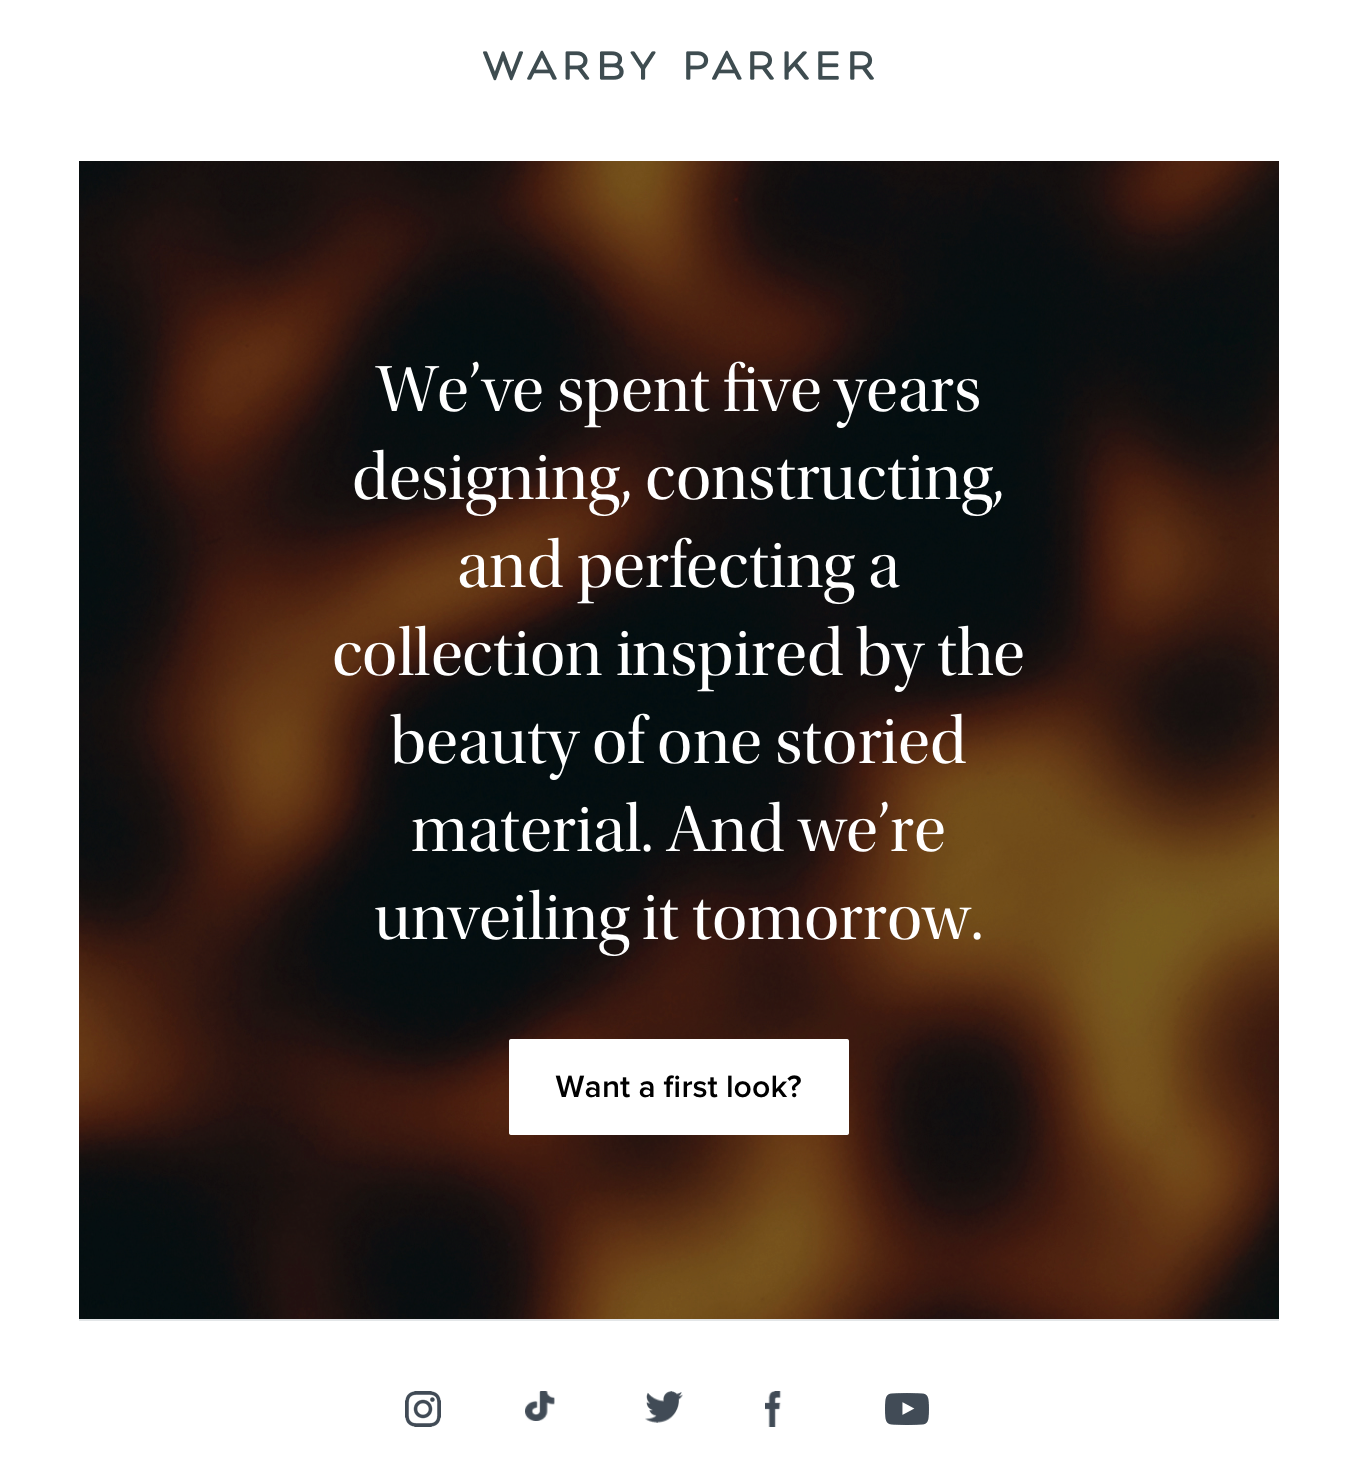 warby parker product unveiling email with CTA button